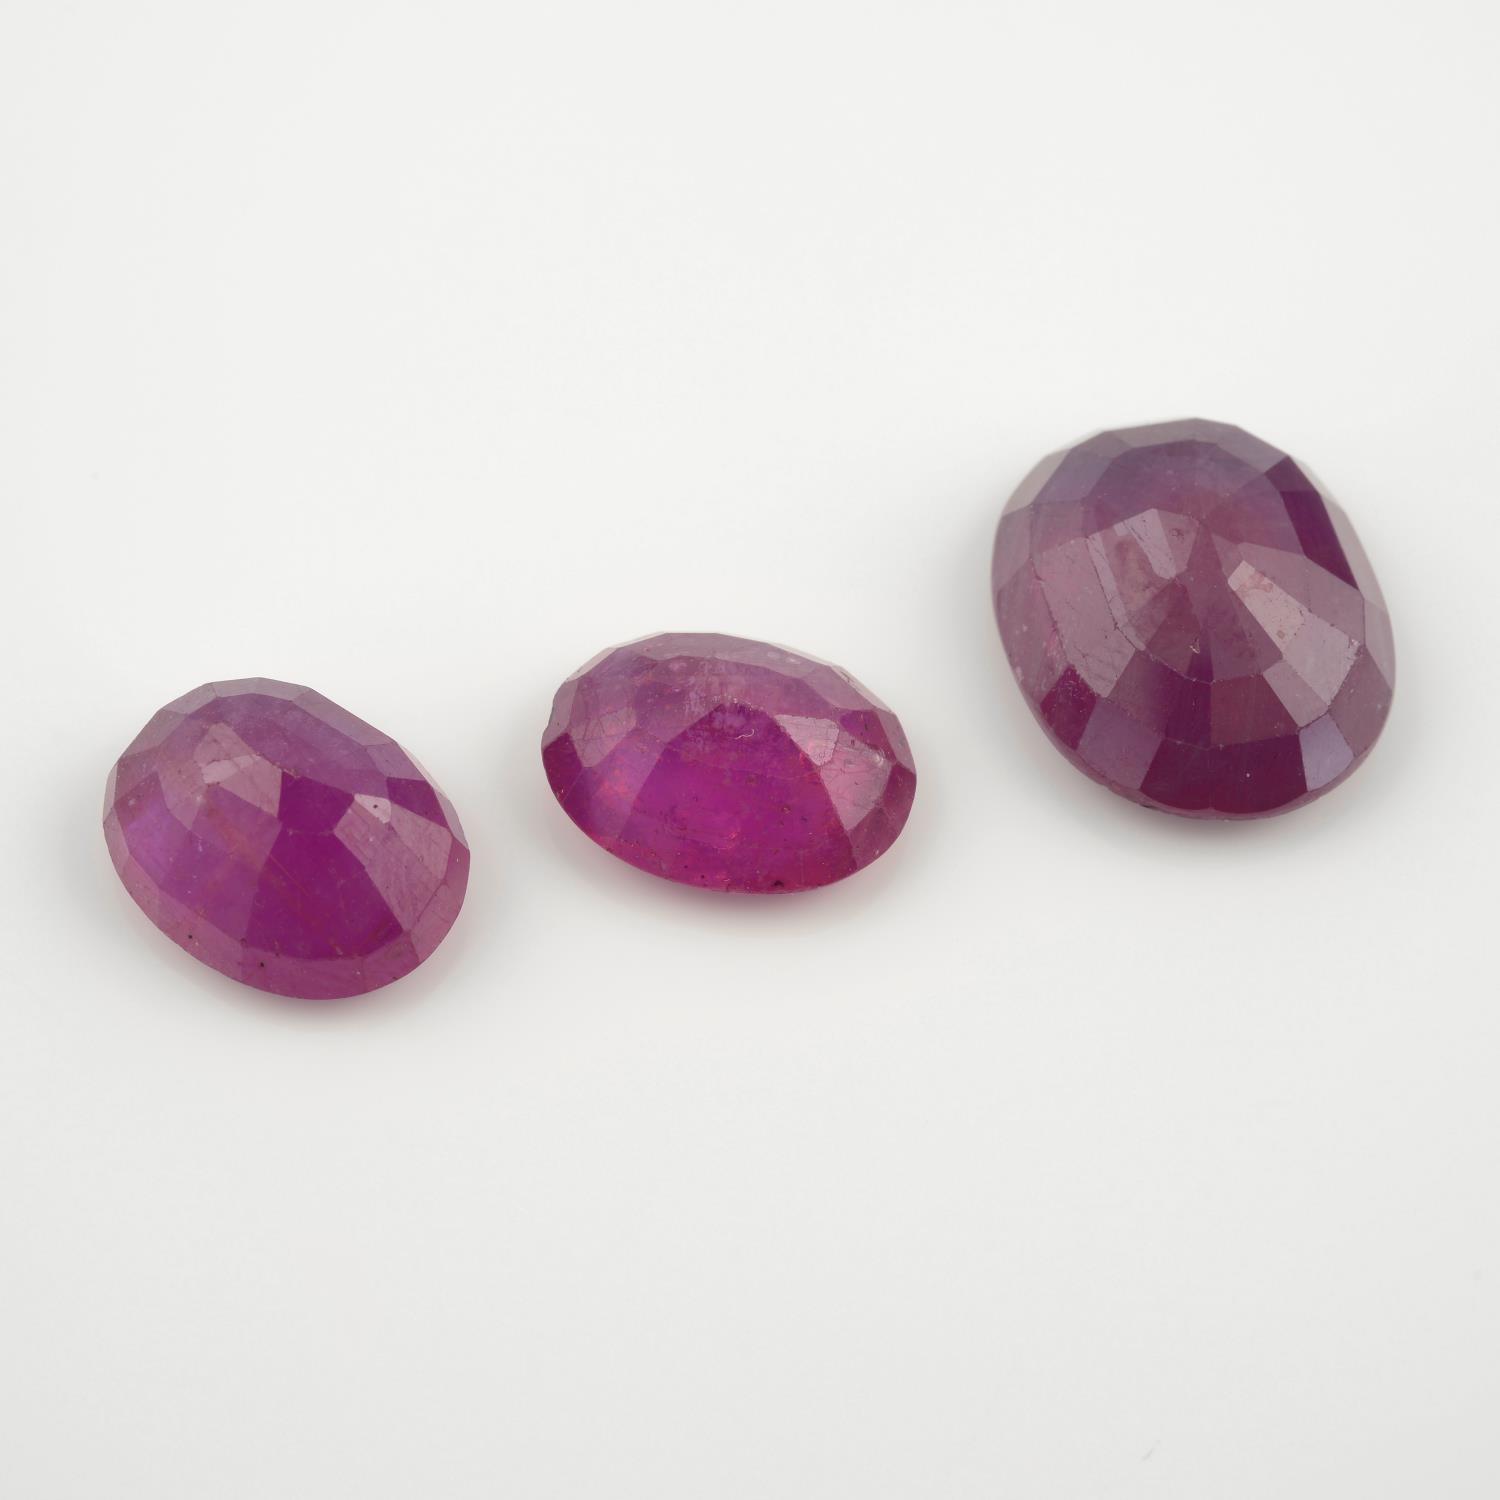 Three oval shape rubies, weighing 19.42ct. - Image 2 of 5